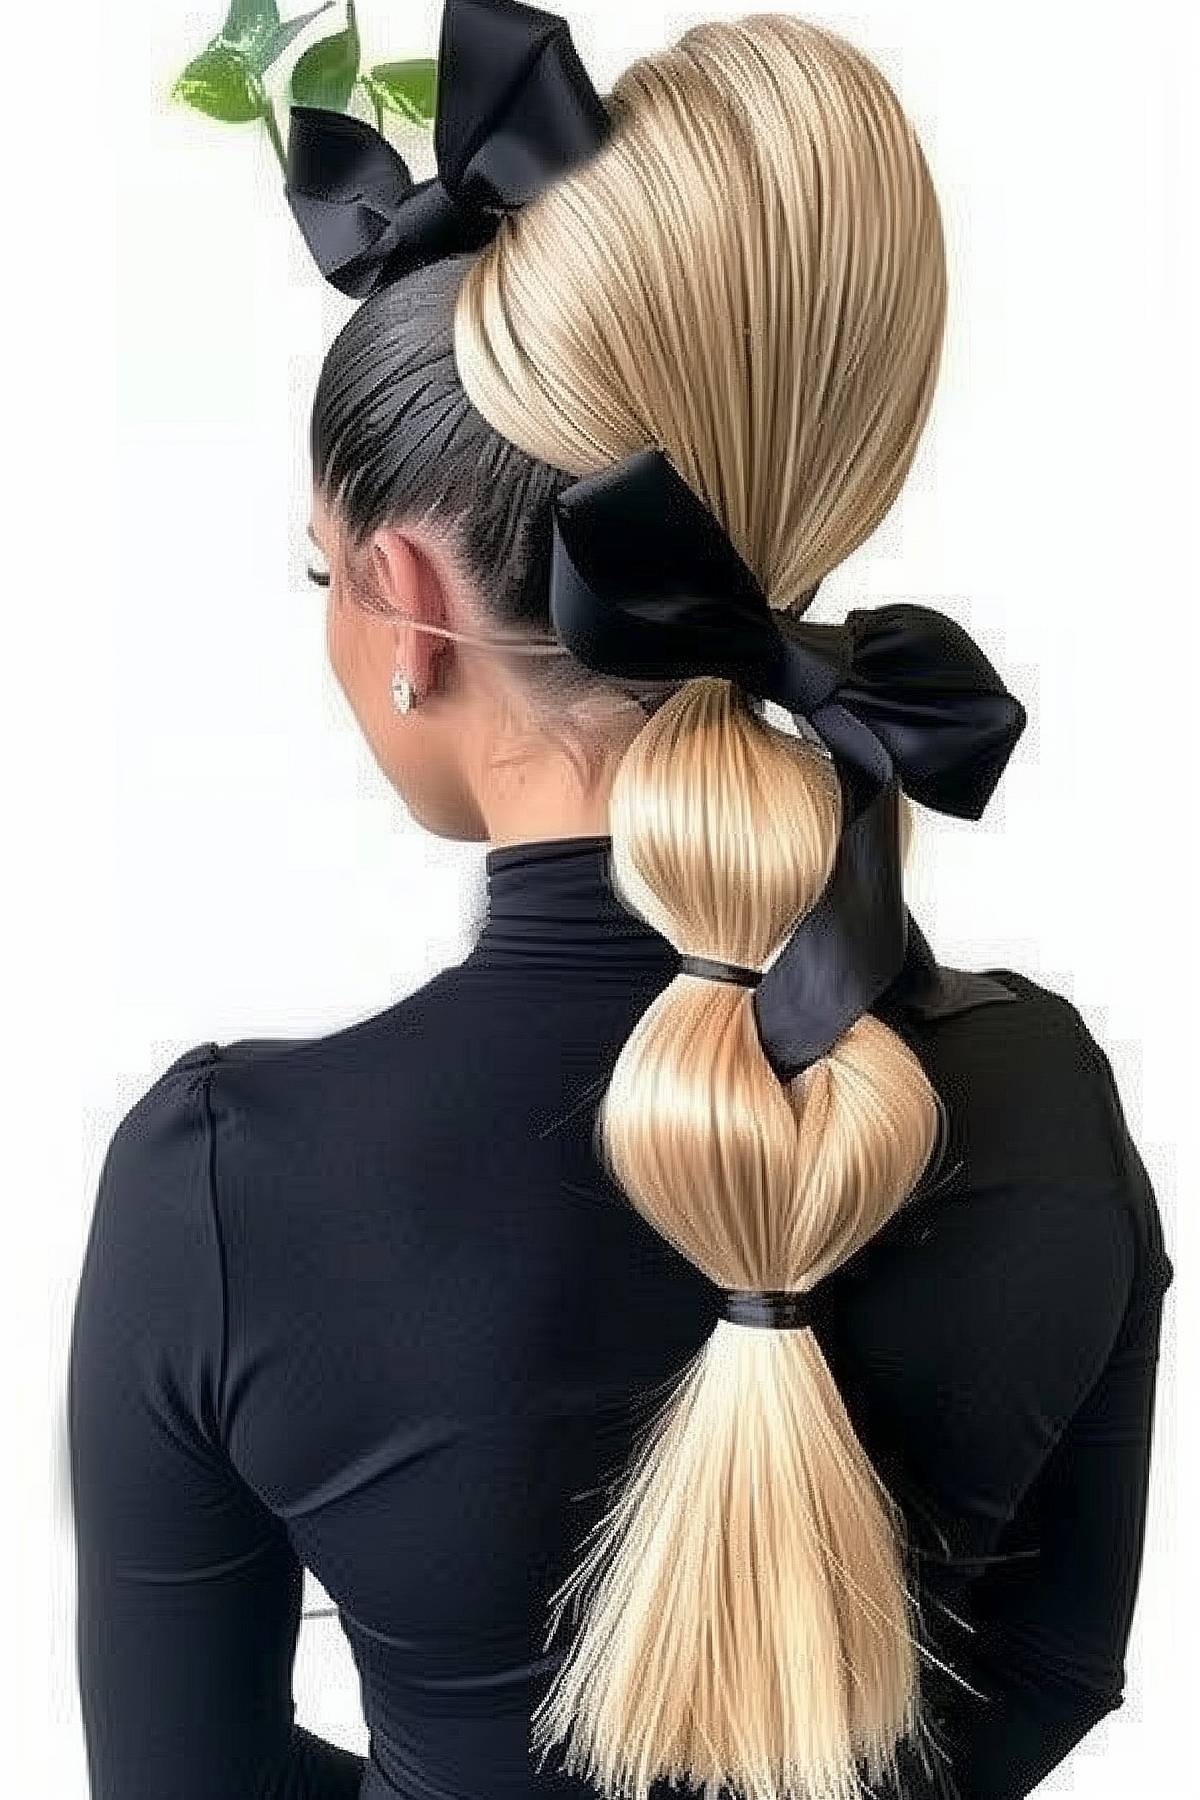 Long straight hair with ribbon-enhanced bubble braids, adding an elegant and sophisticated touch to the hairstyle.